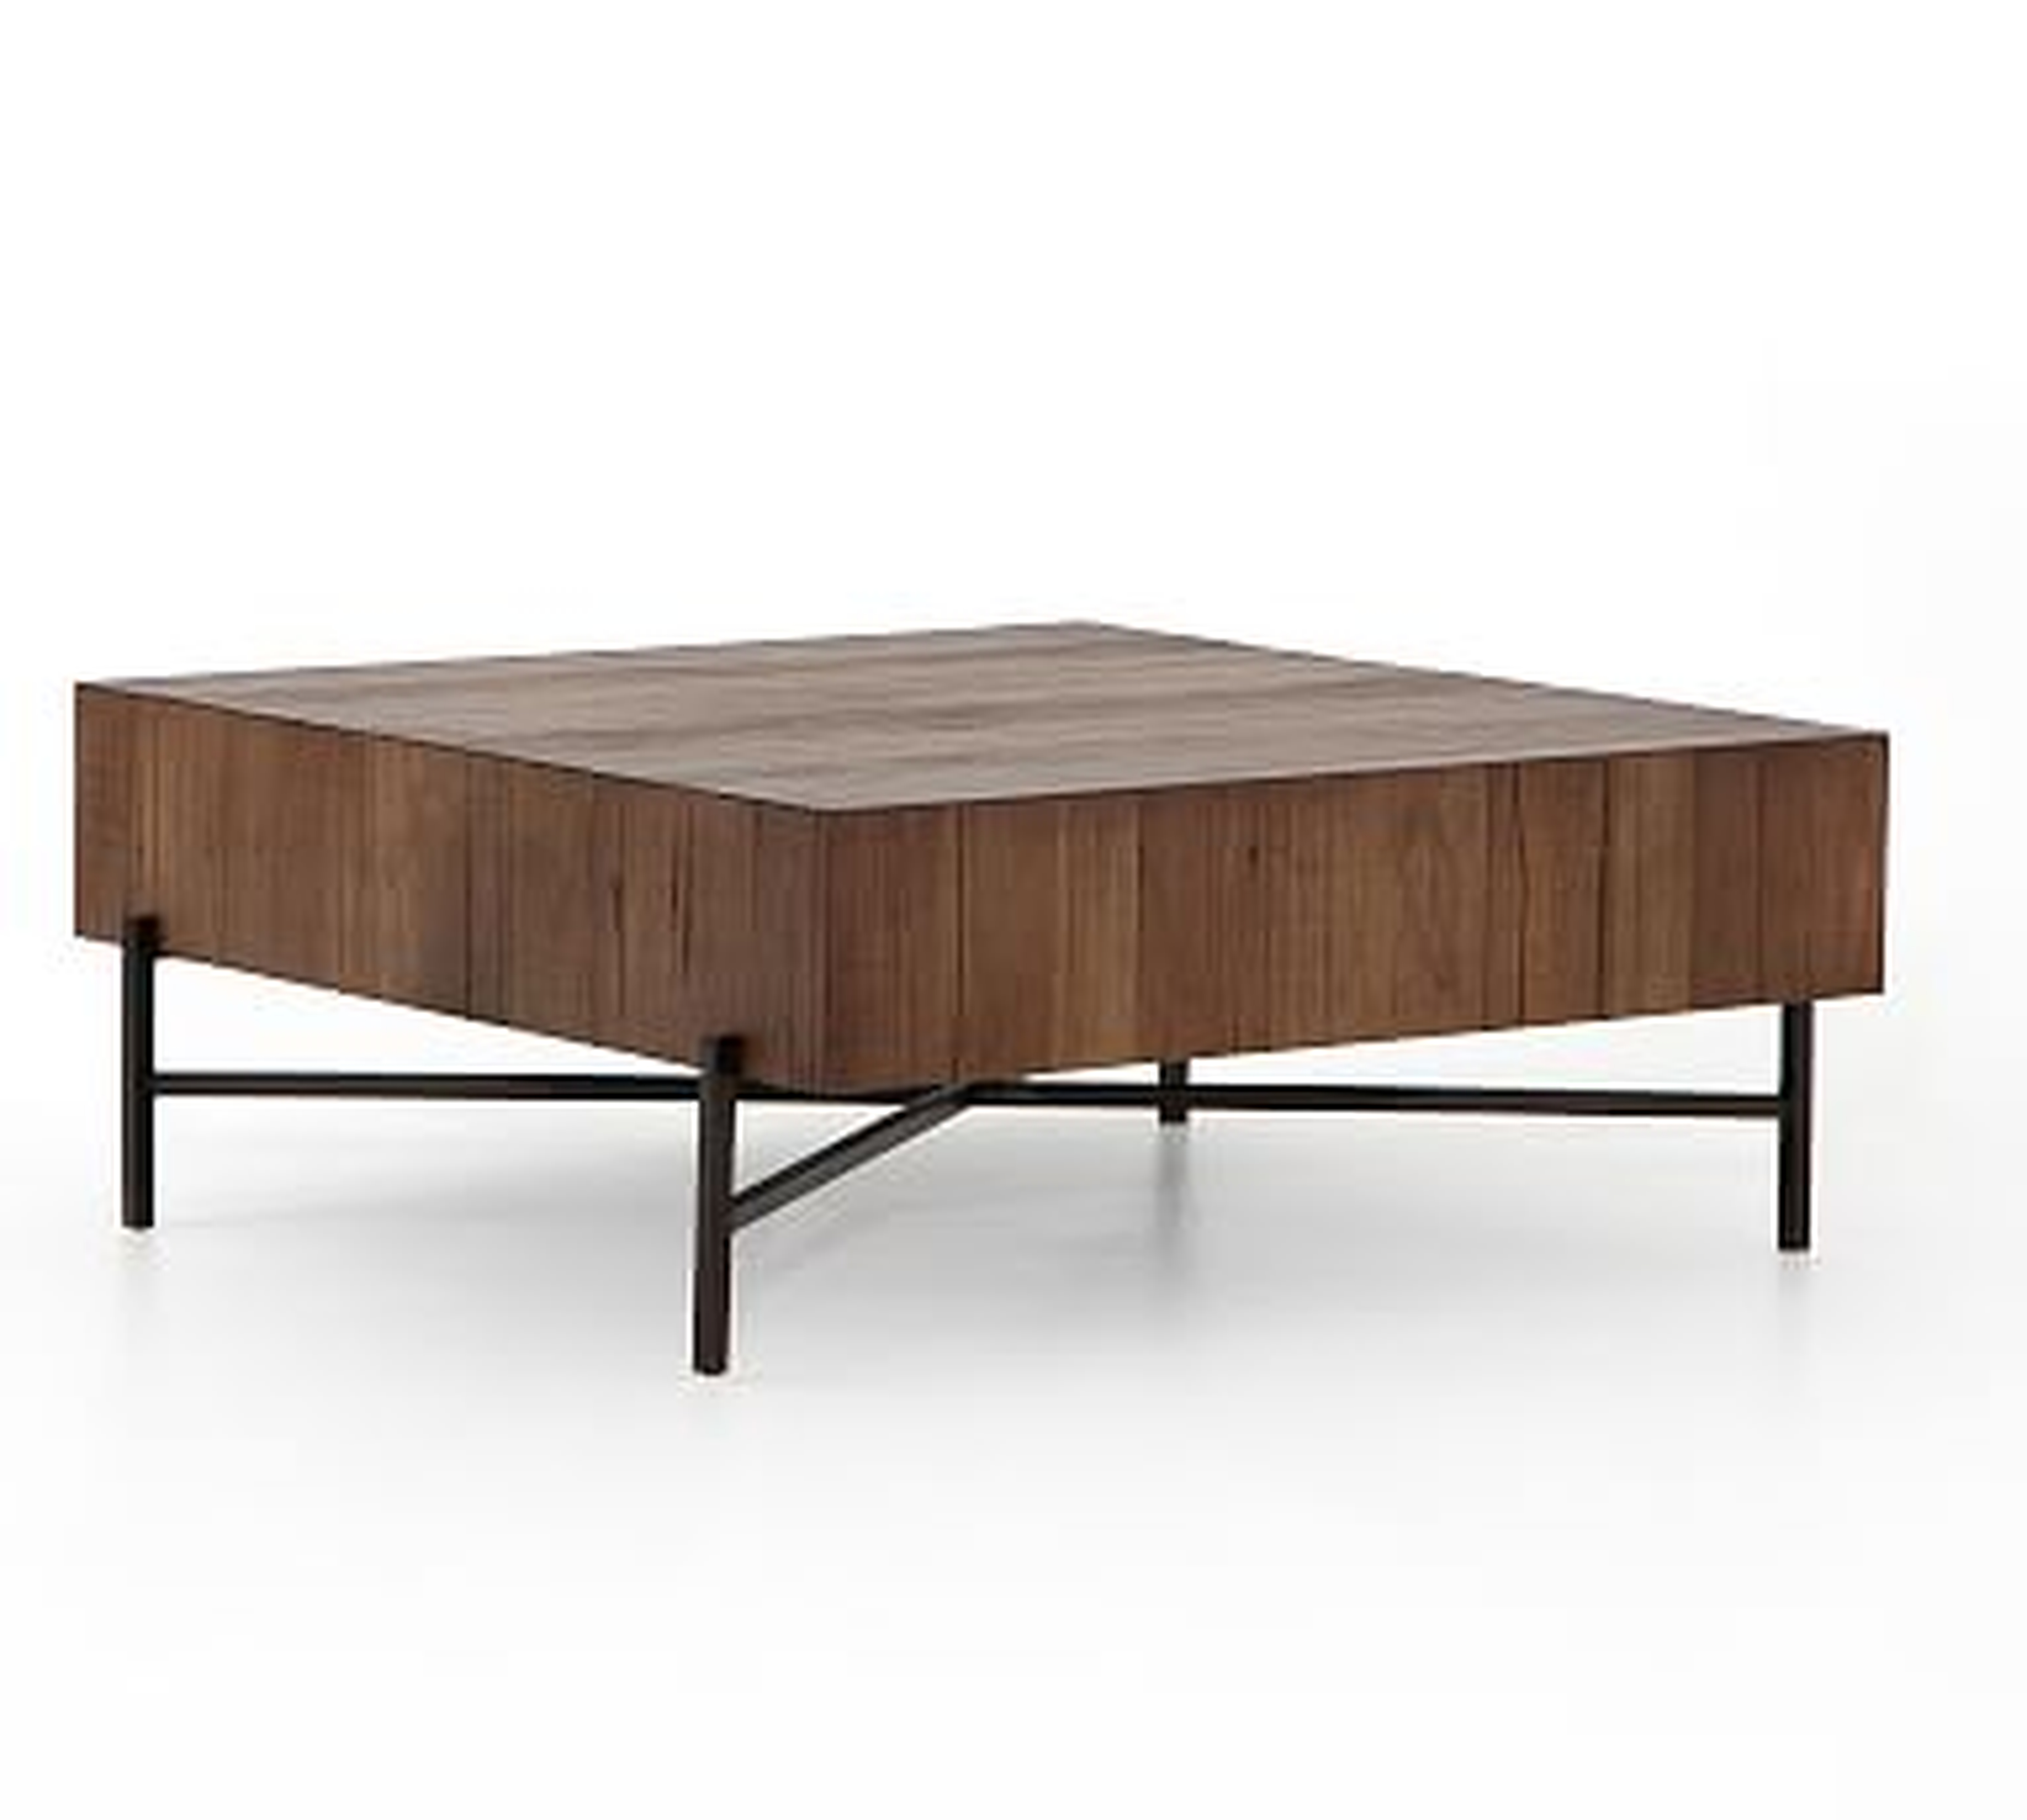 Fargo Square Coffee Table, Natural Brown - Pottery Barn